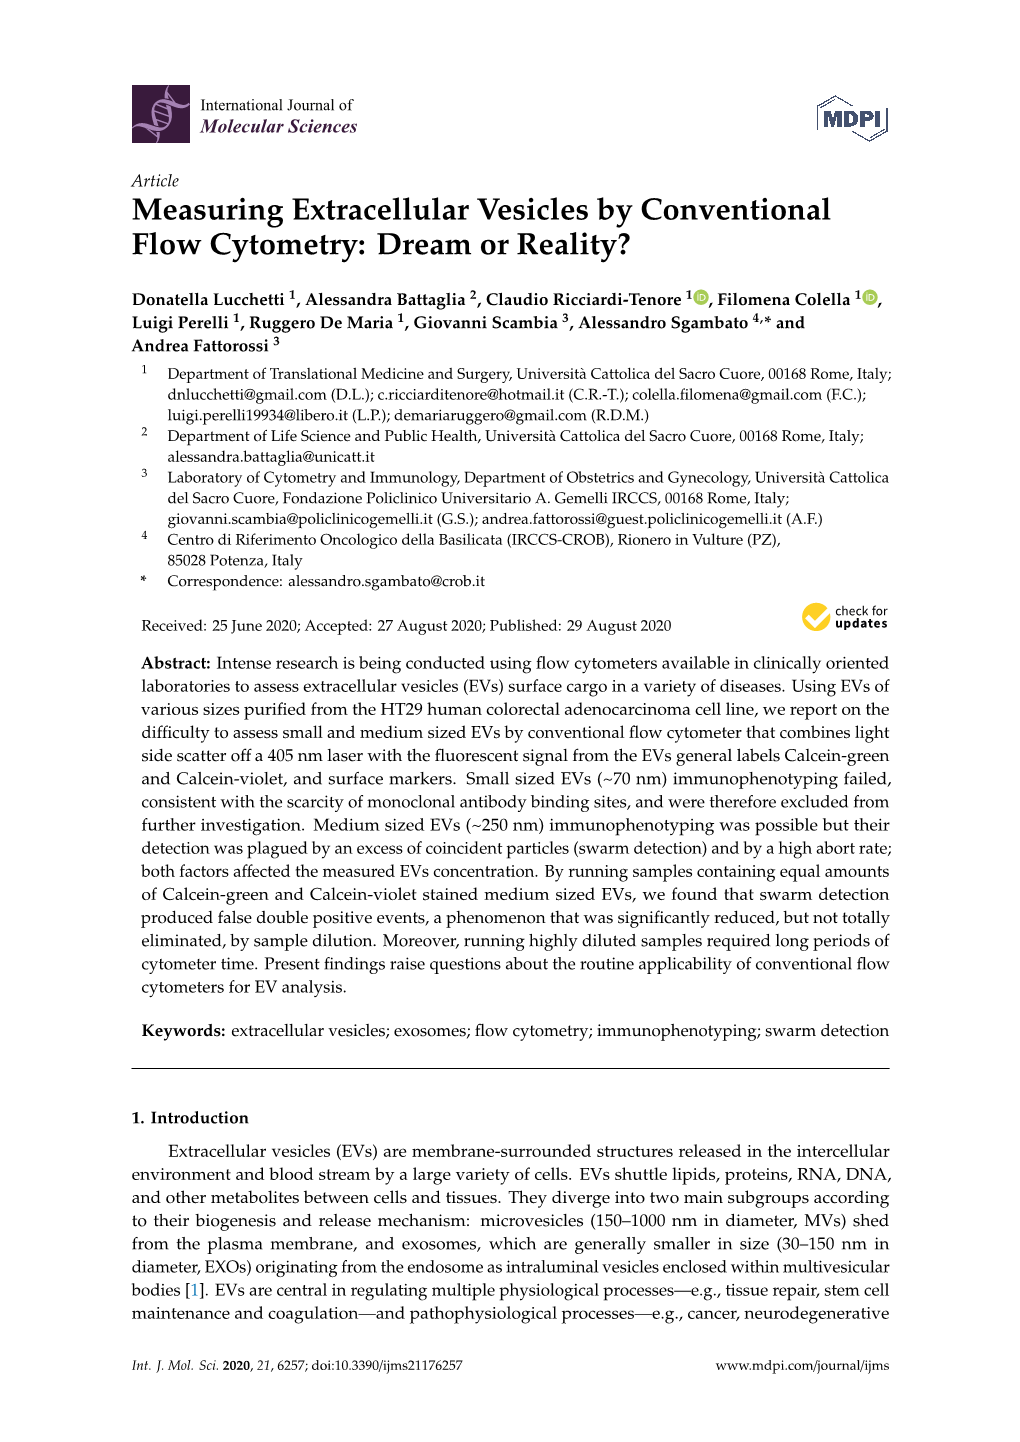 Measuring Extracellular Vesicles by Conventional Flow Cytometry: Dream Or Reality?